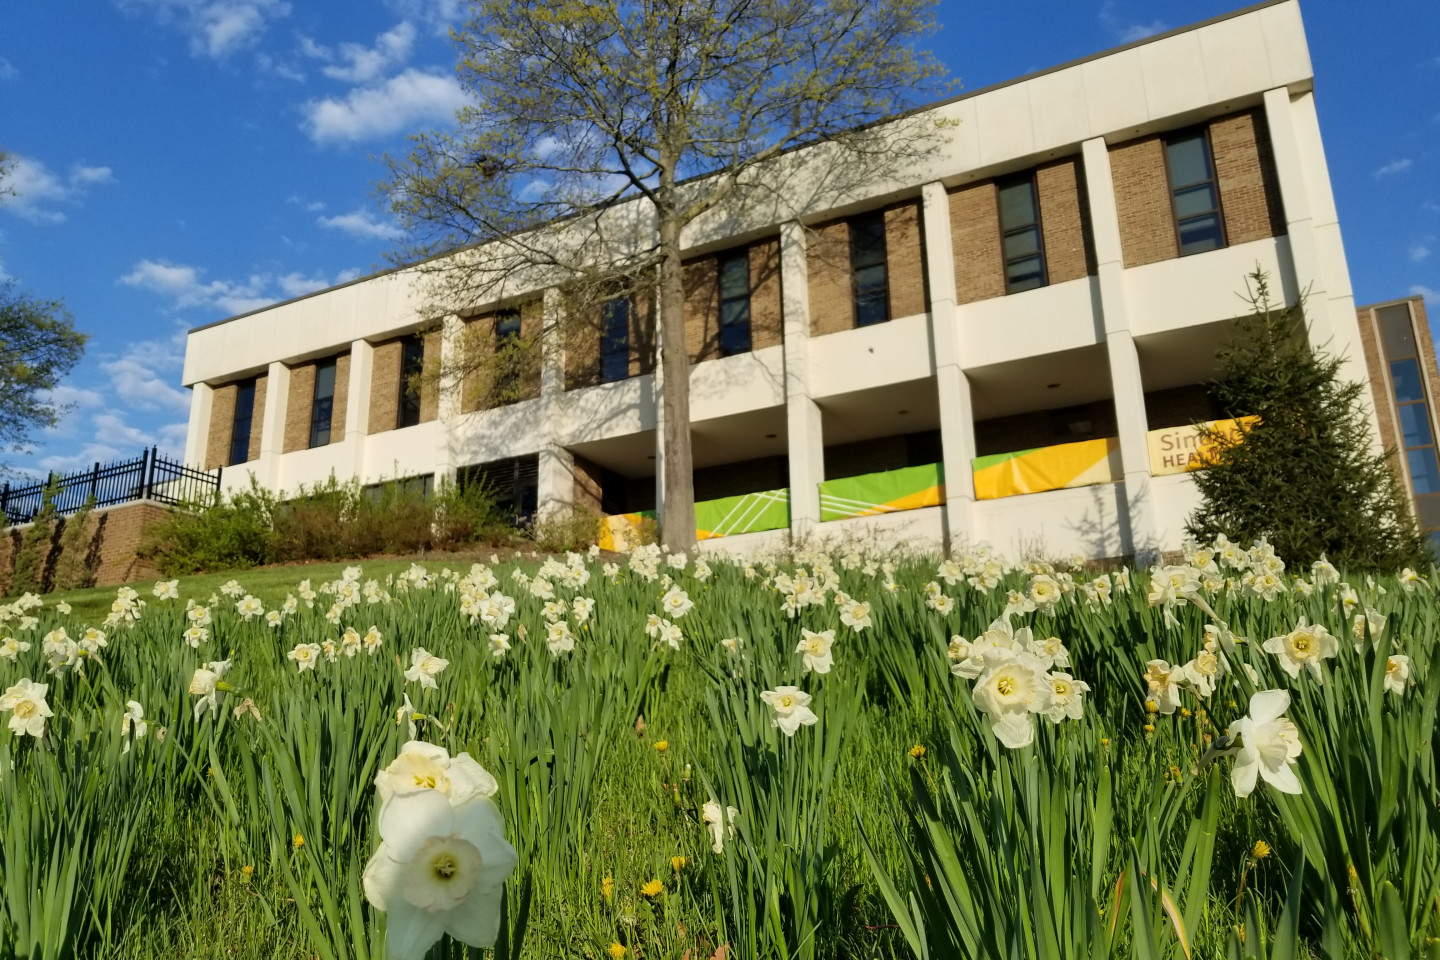 Sindecuse Health Center building pictured with a grassy slope full of blooming daffodils.